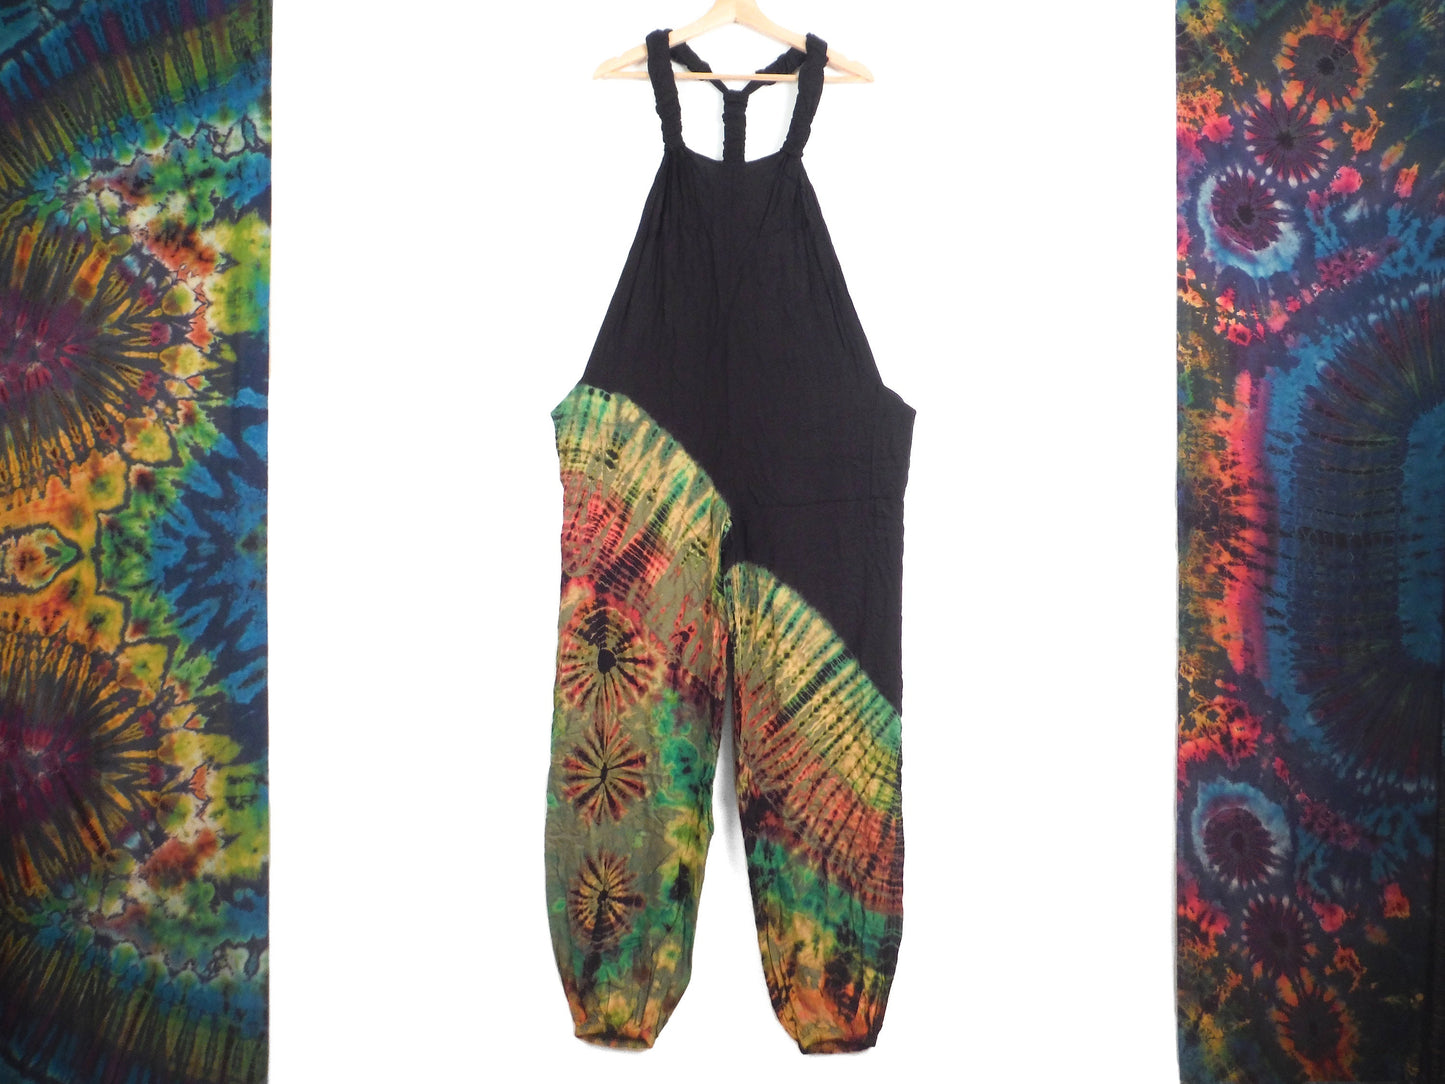 Half Tie-Dye Dungarees - Black and Moss Green